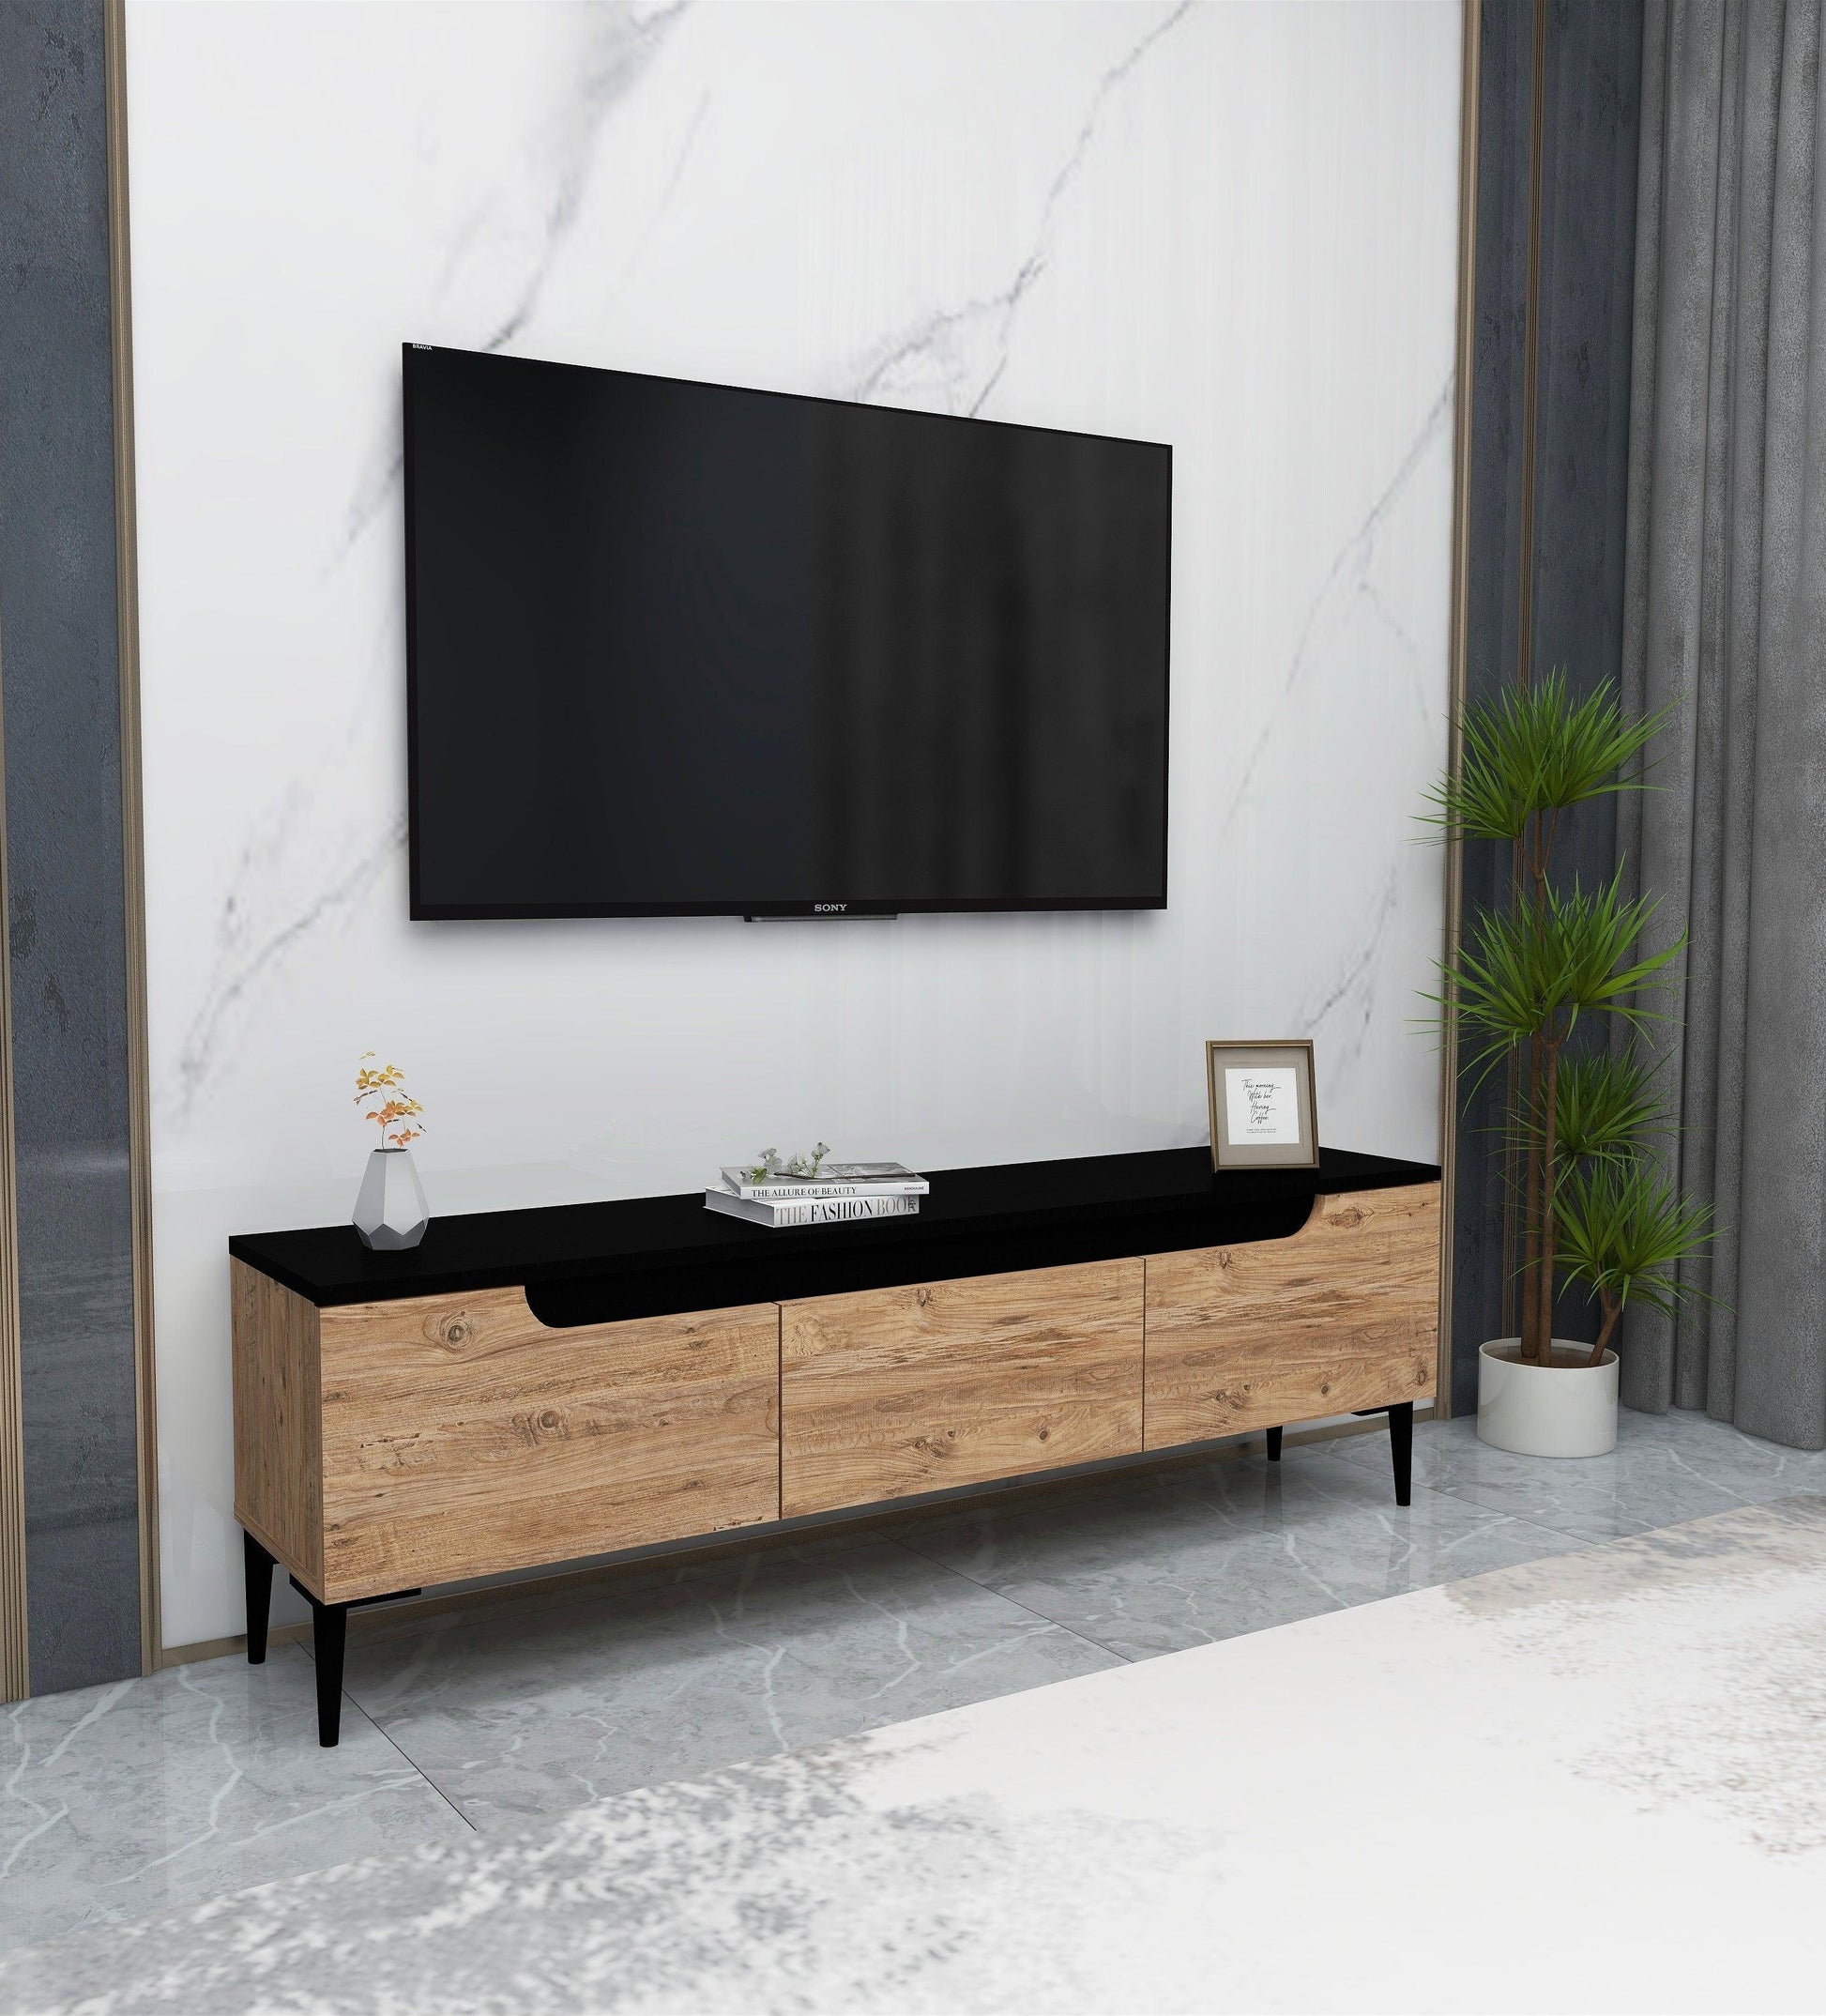 Amiray TV Stand with Cabinets - Destina Home, TV Stand, Media Console, TV cabinet, Wooden TV Stand, Media Stand, TV Lowboard, Entertainment Center, Wood TV Unit, TV Board, TV Table, Media Center, Living Room, Furniture